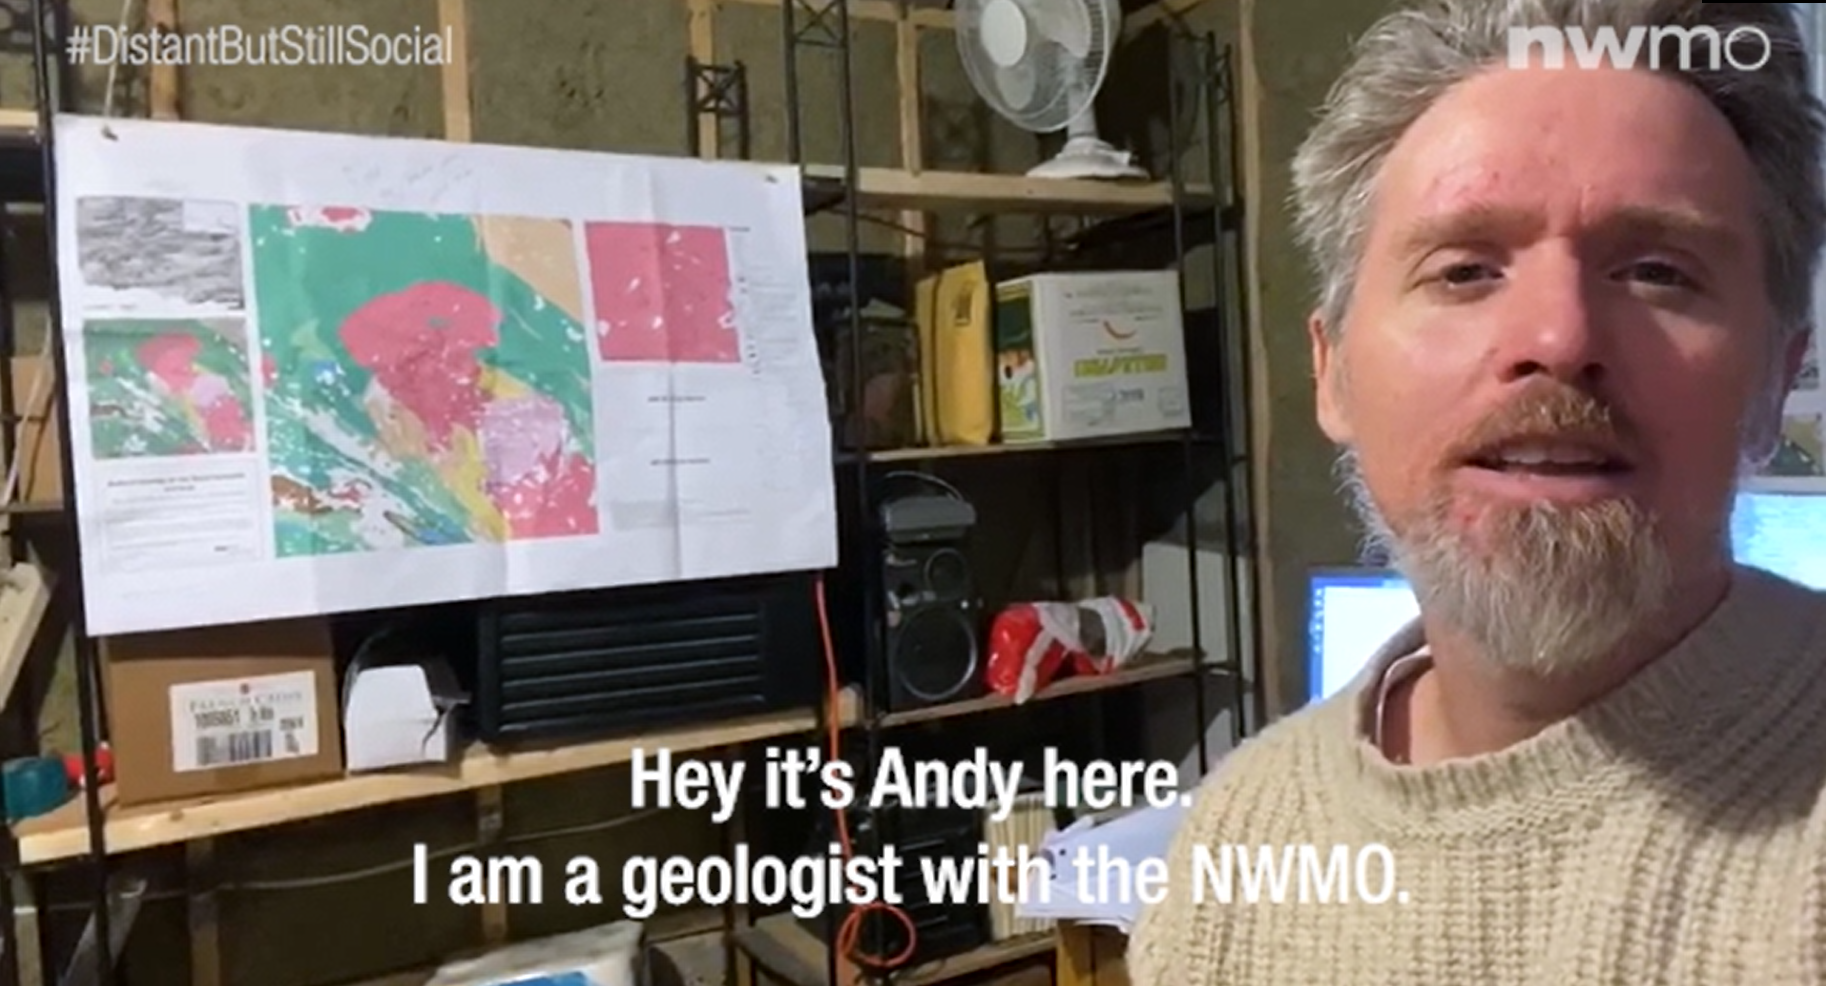 Andy Parmenter, NWMO geologist, talking about remote work that the Geoscience Team is doing during the COVID-19 outbreak